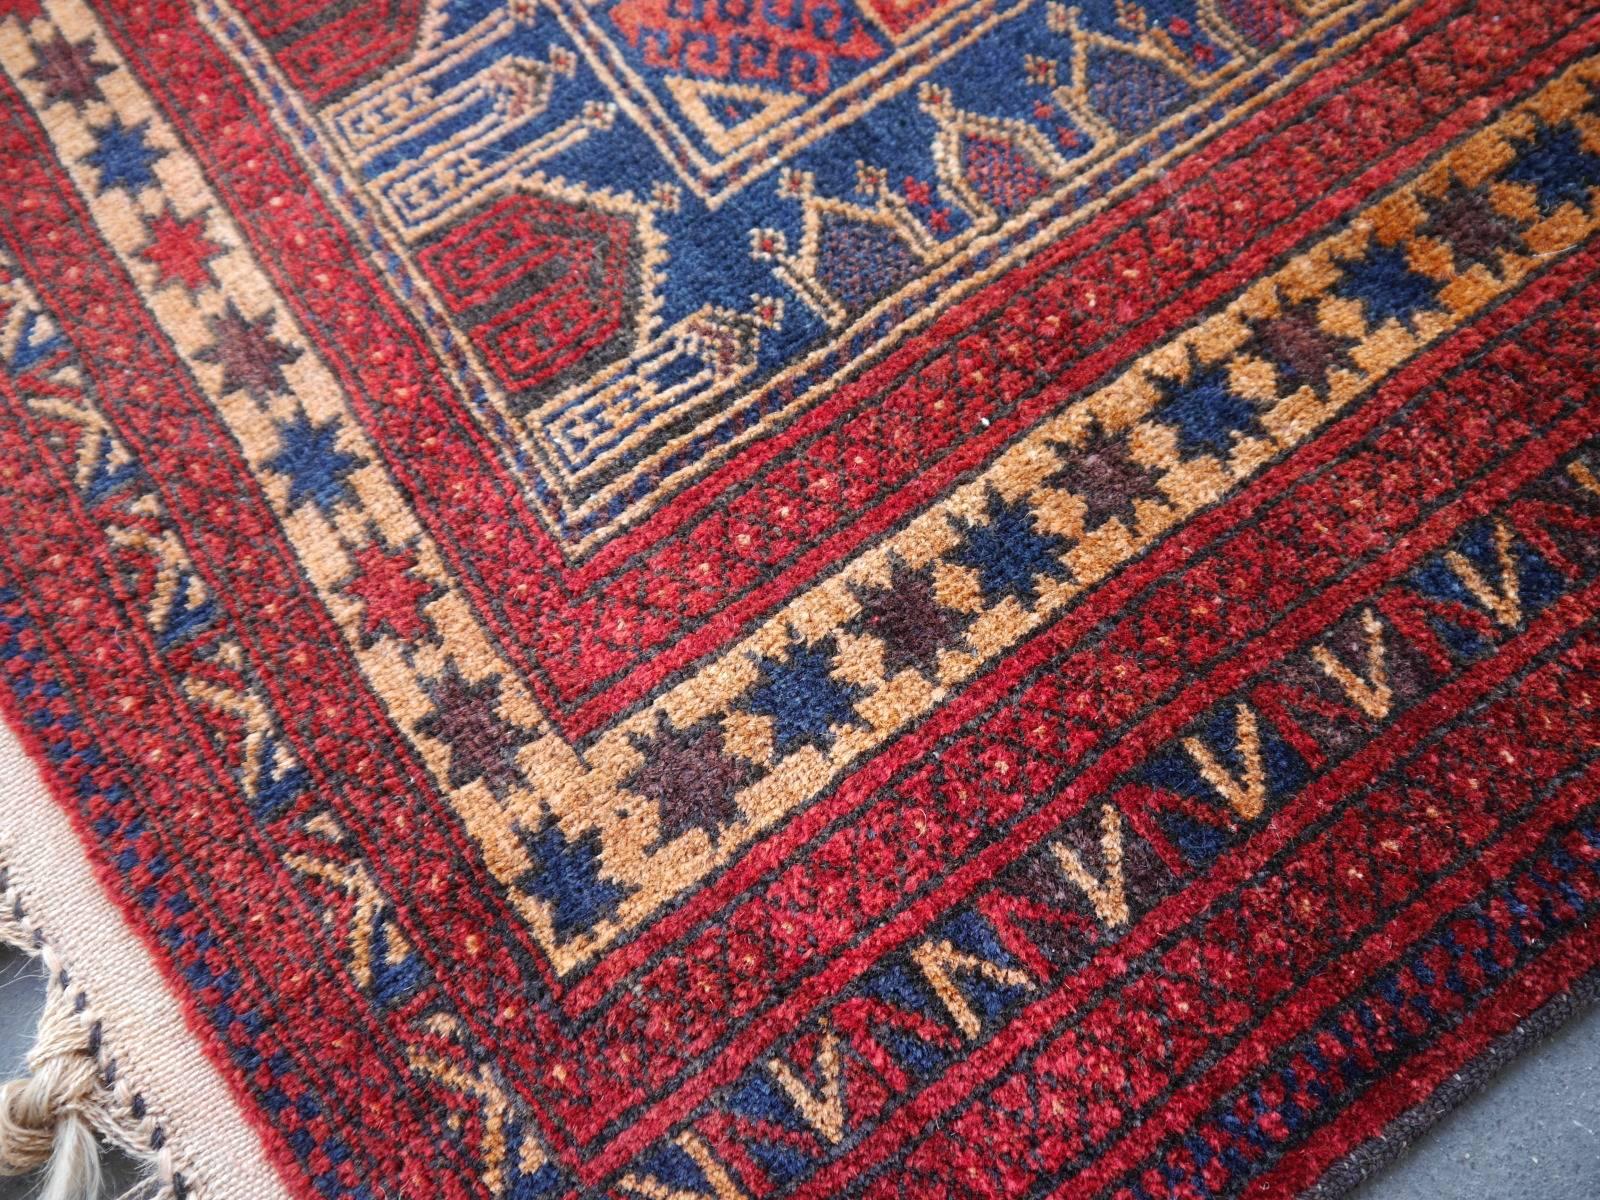 Vintage Balouch tribal prayer rug blue and rust color

• Beautiful vintage rug
• All handmade
• Pile pure wool
• Traditional design
• Condition: Very good, original fringes in excellent condition. One small old restoration, professionally